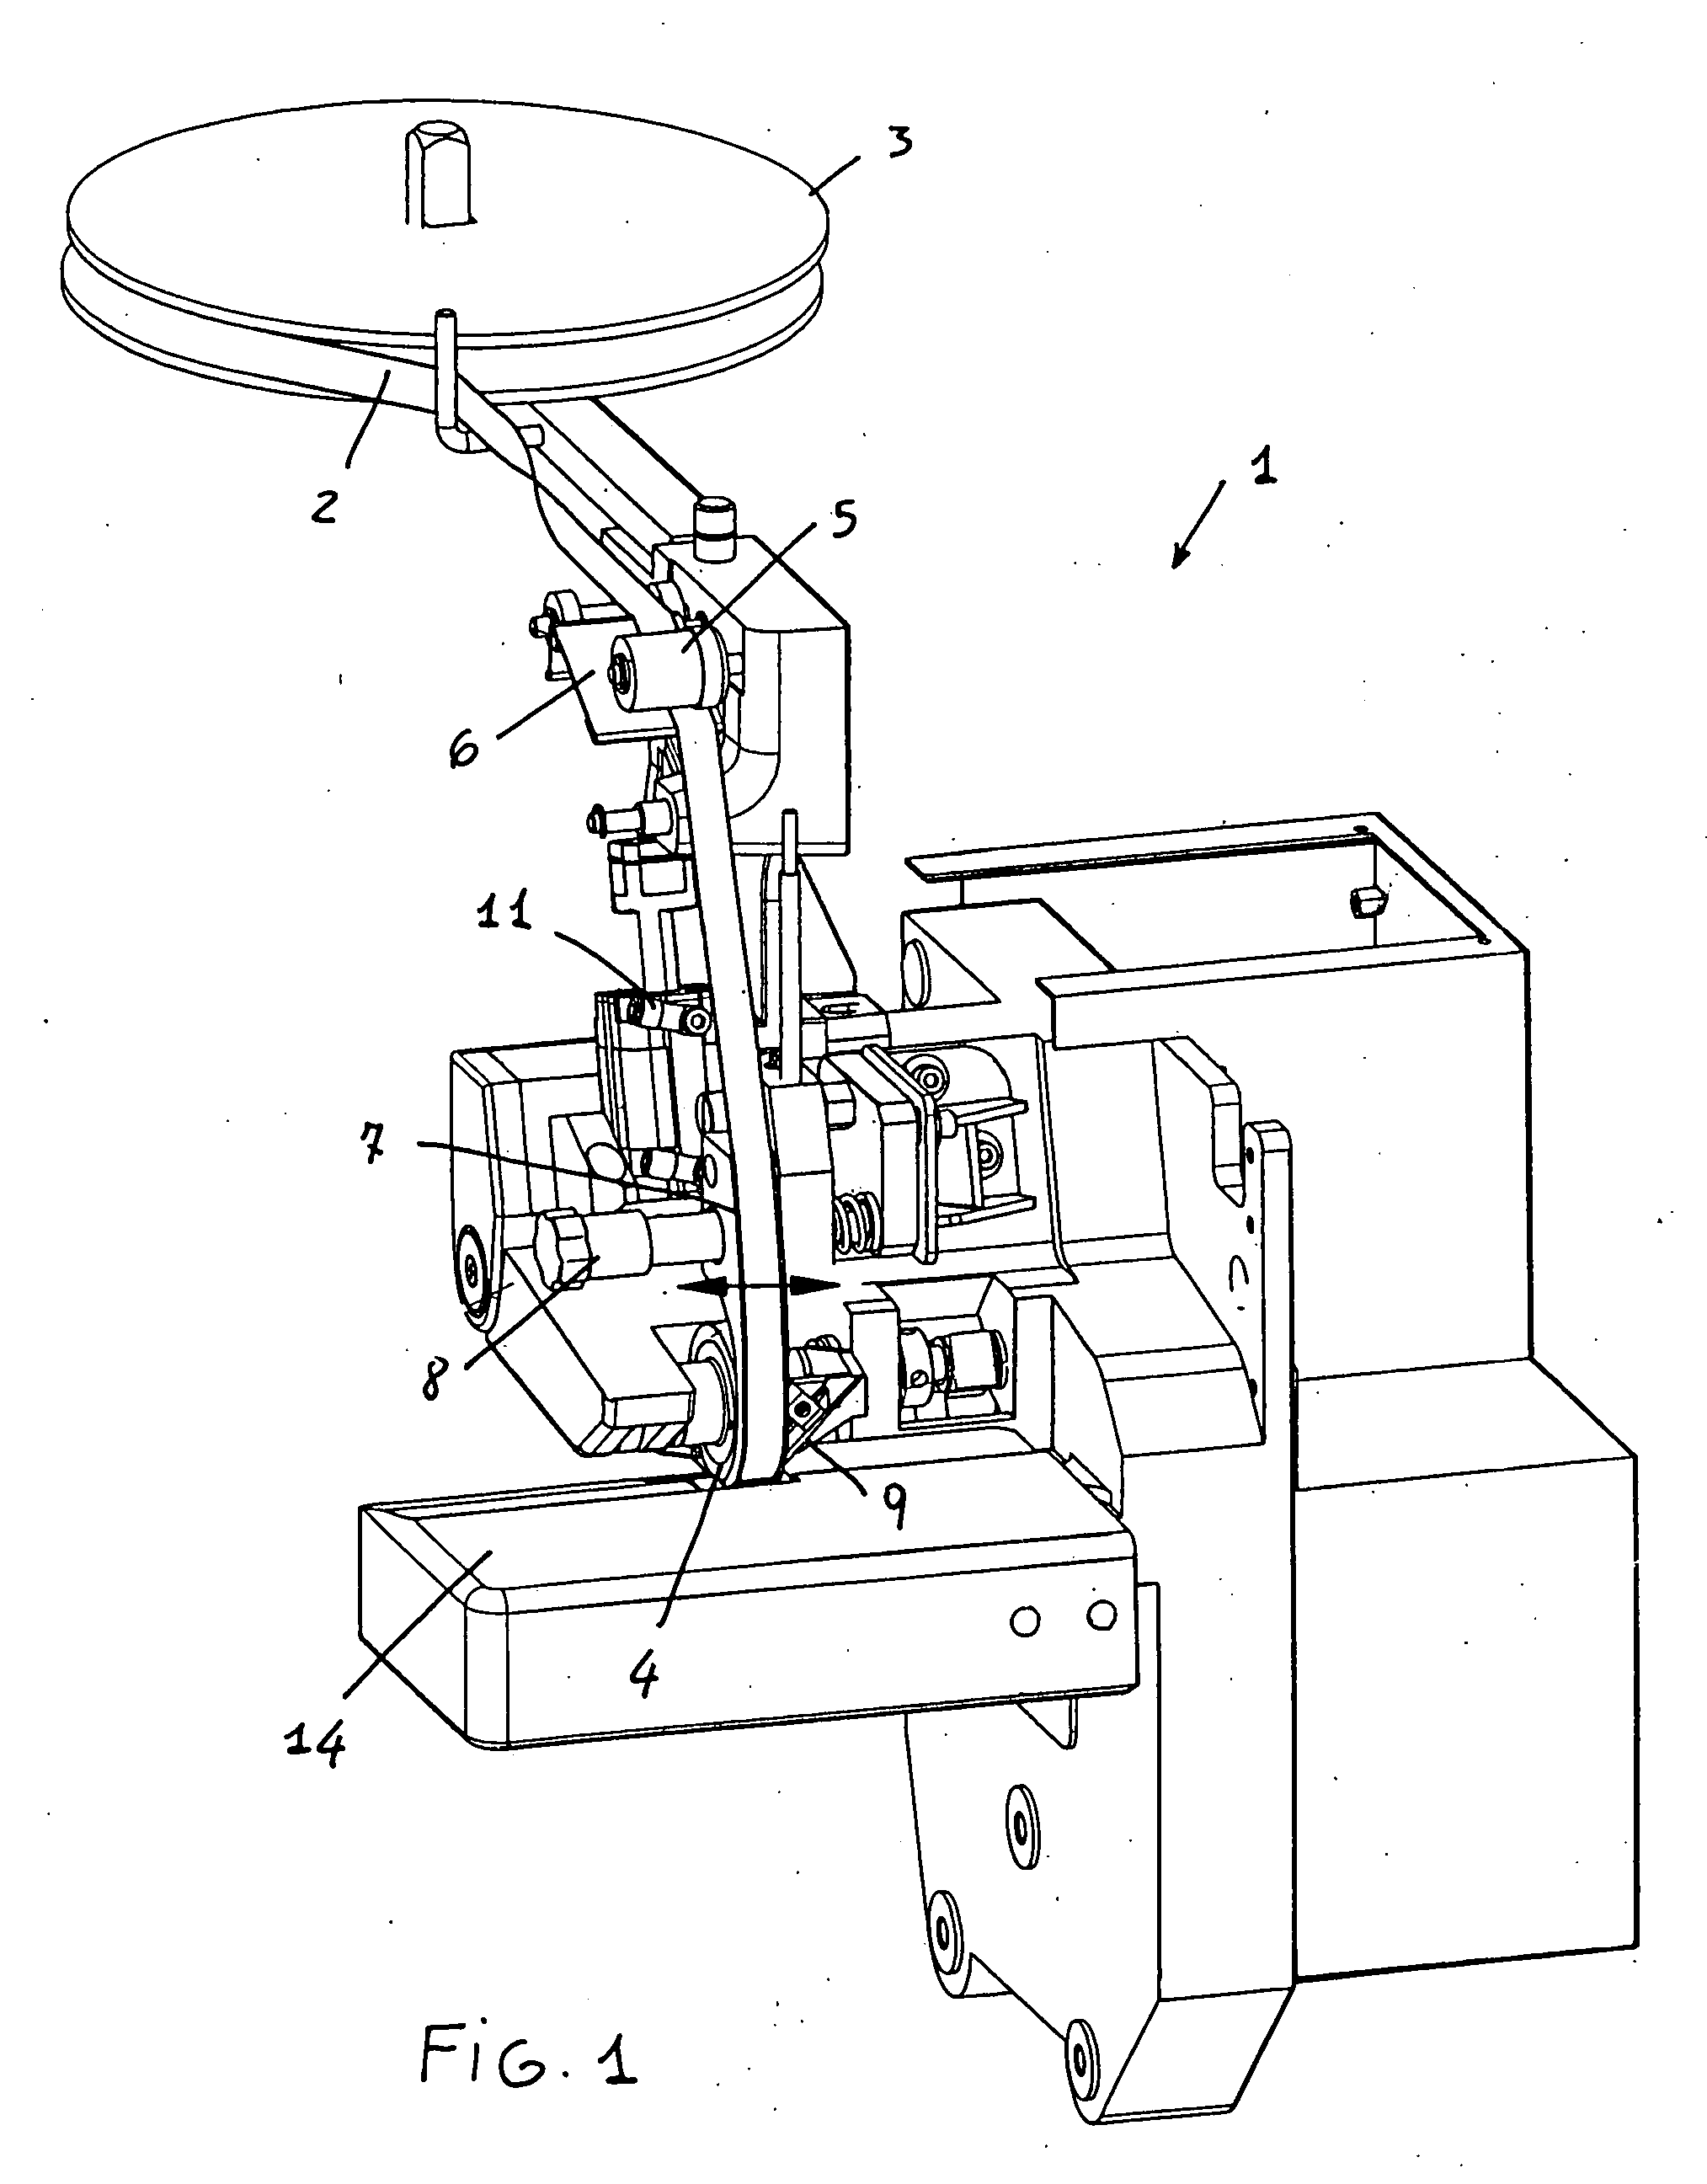 Adhesive applying apparatus for applying an adhesive compound on fabric material